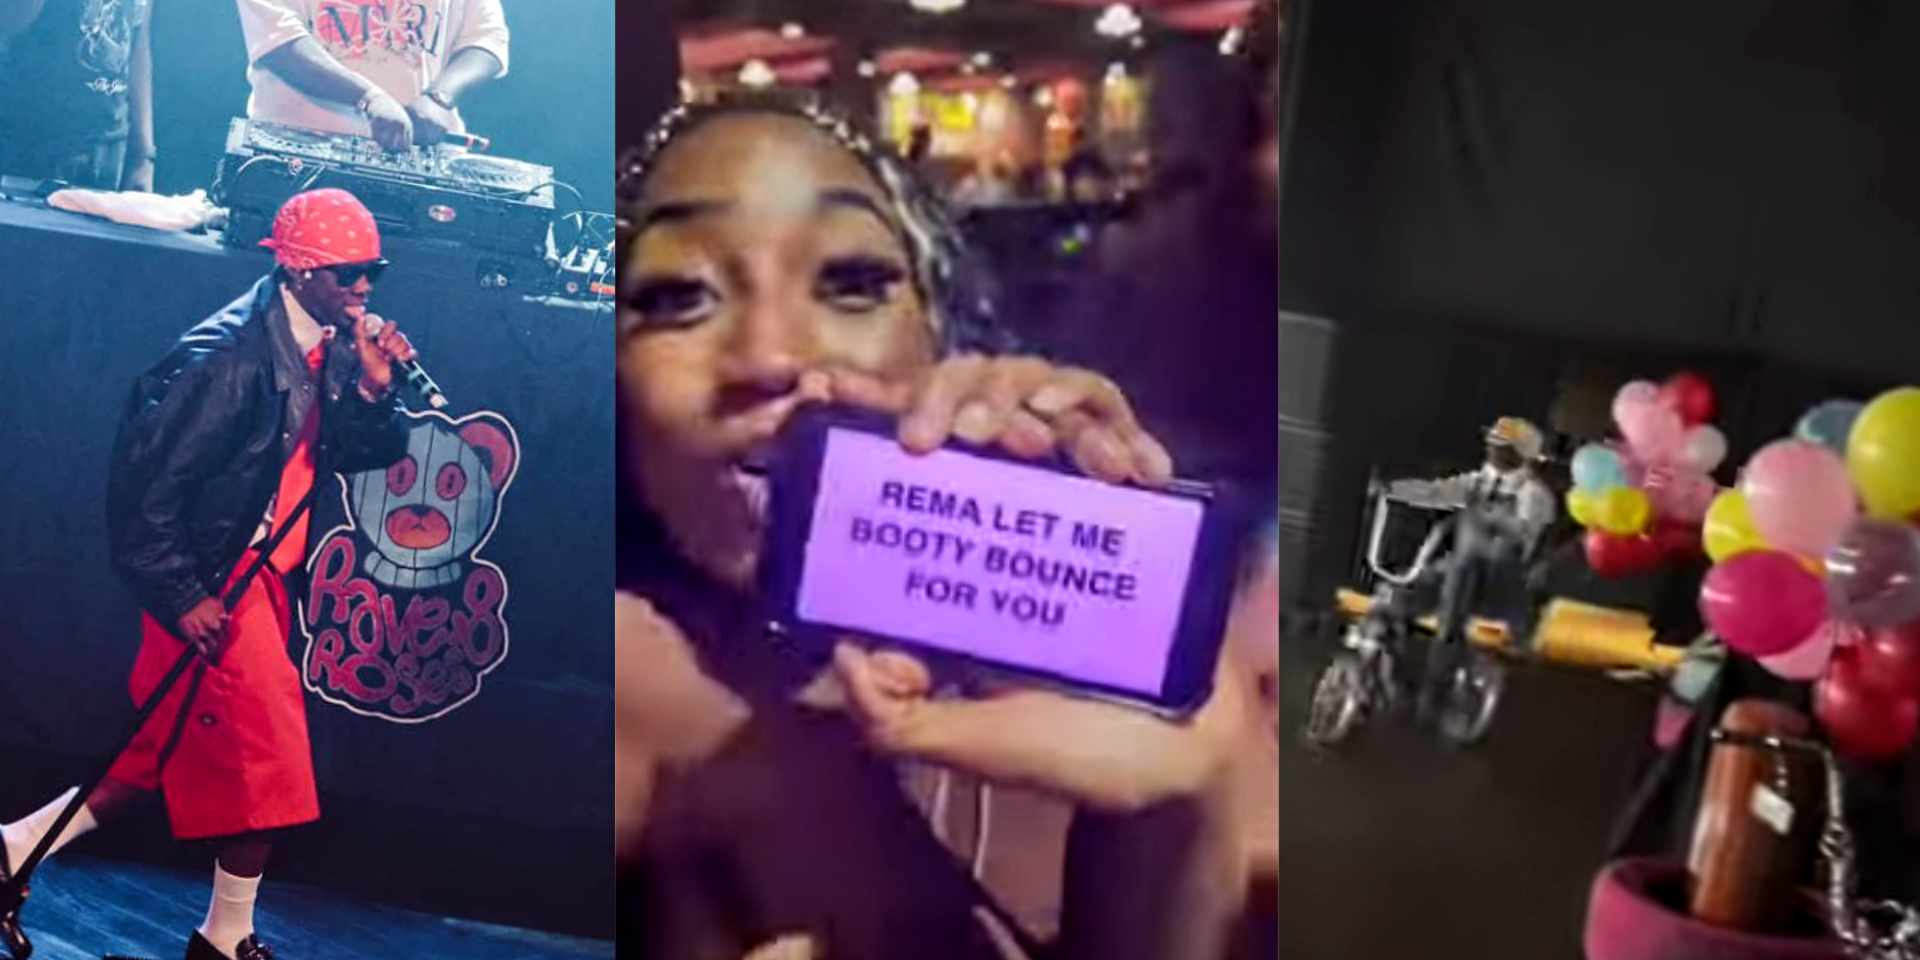 Moment Rema receives 'freaky' phone message from fans as he storms stage on bicycle in Texas [Video]